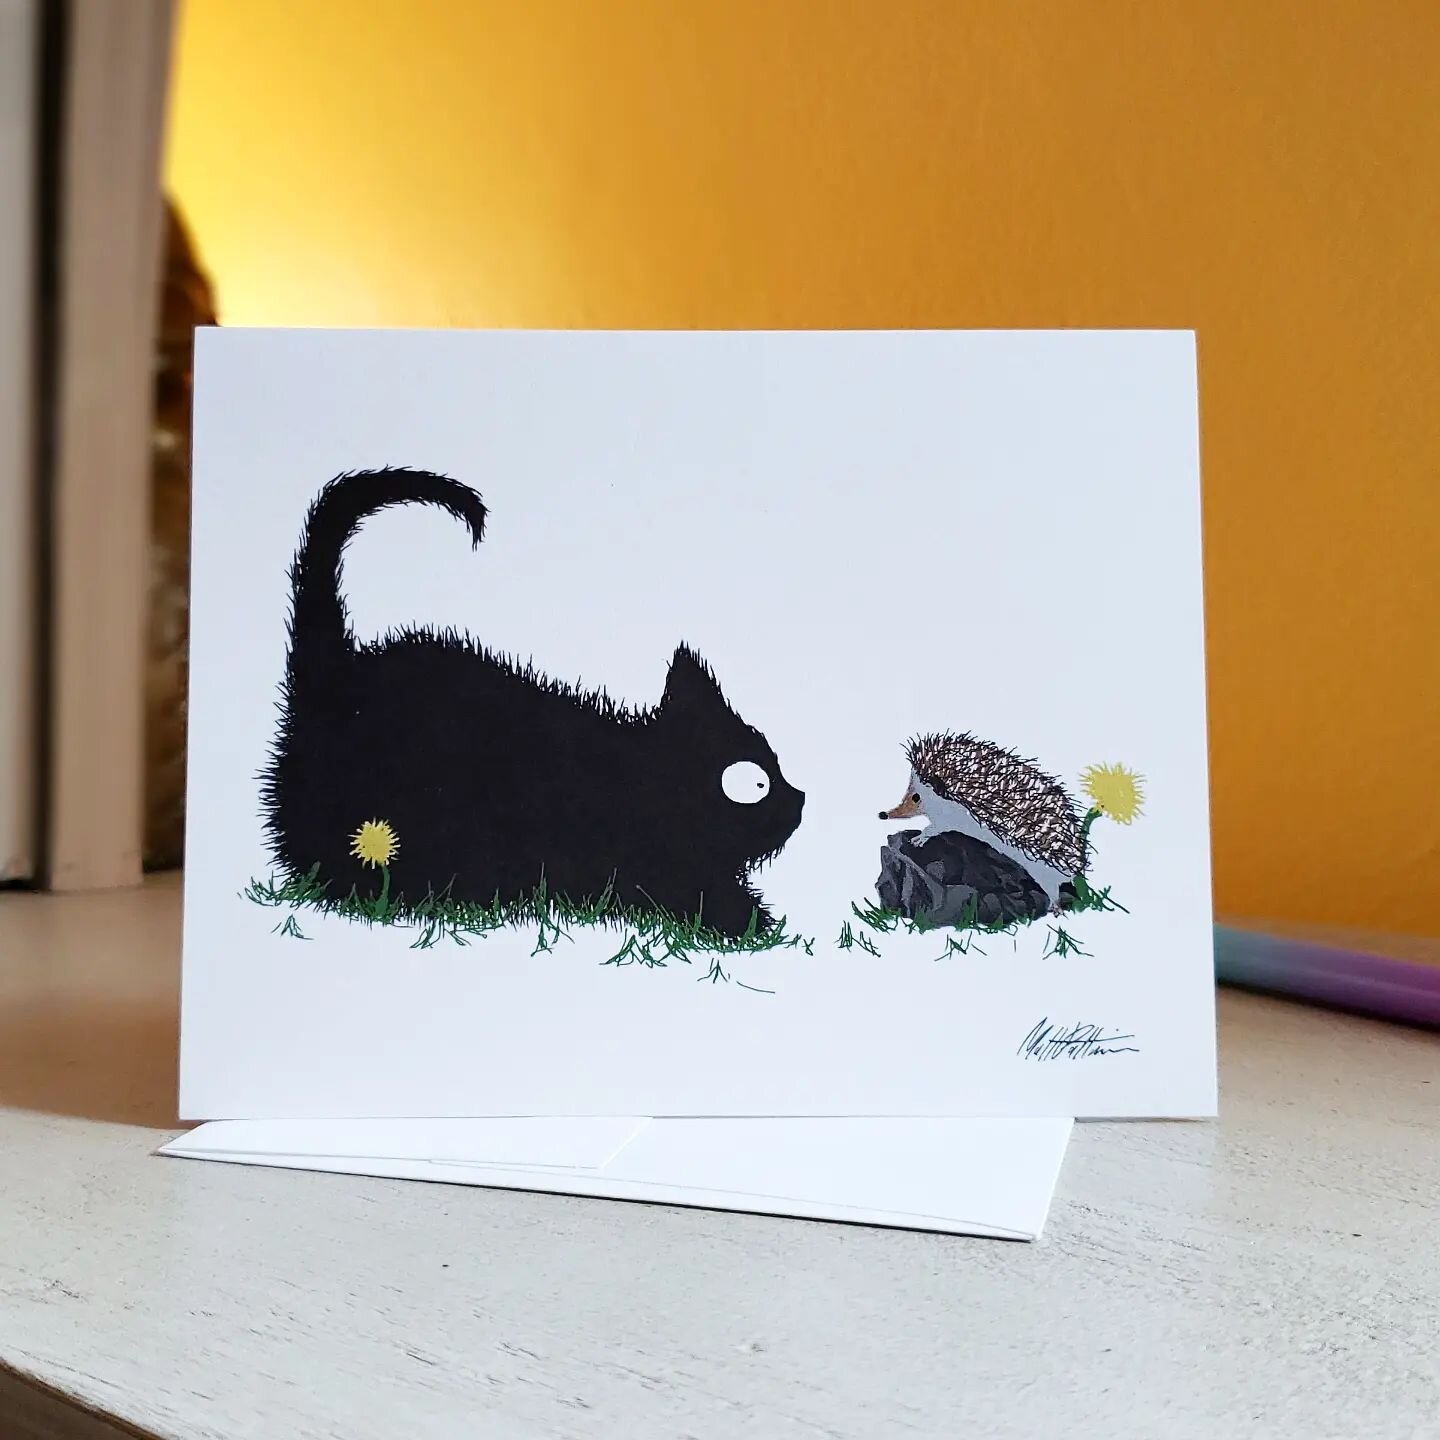 In one week, on 5/13, is our first show of the season! Find us,  and so many more amazing artistans,  at @themarket1115 from 10 to 4. See link in profile for more show dates and emails.
. 
.
.
#fallenpeachlane #greetingcard #blackcat #ctartist #illus